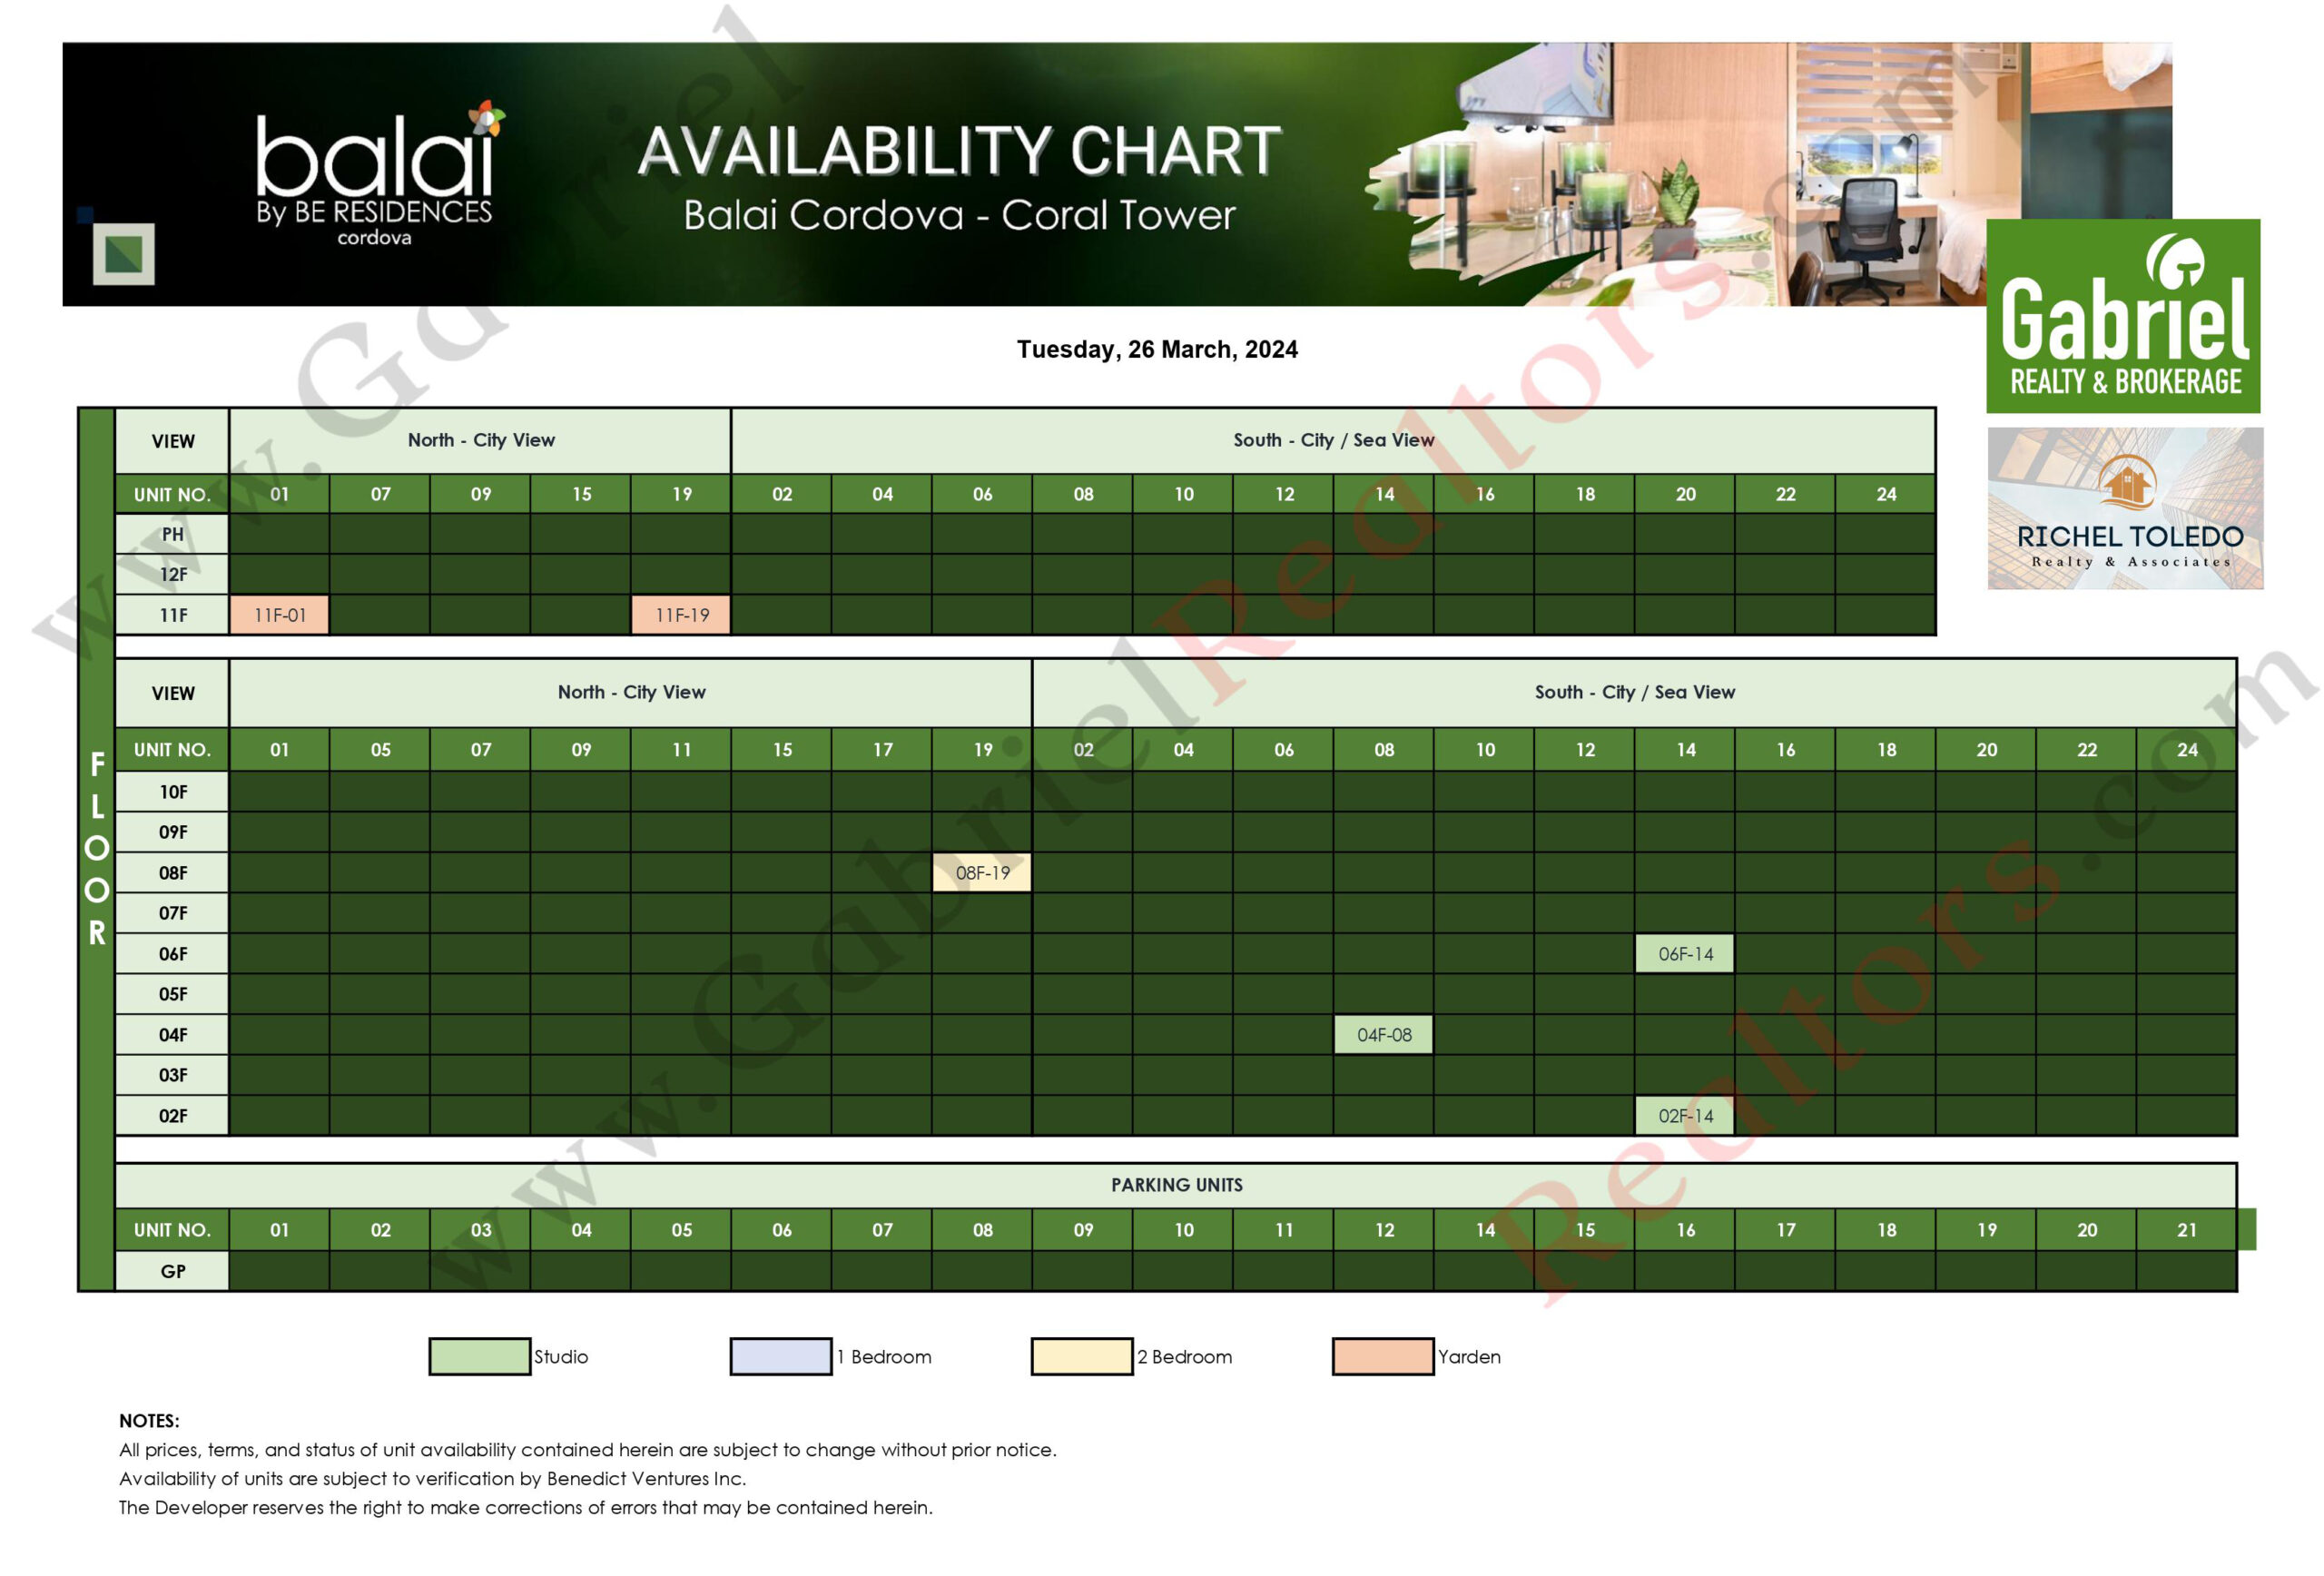 BALAI BY BE RESIDENCES CORDOVA CORAL Availability Chart